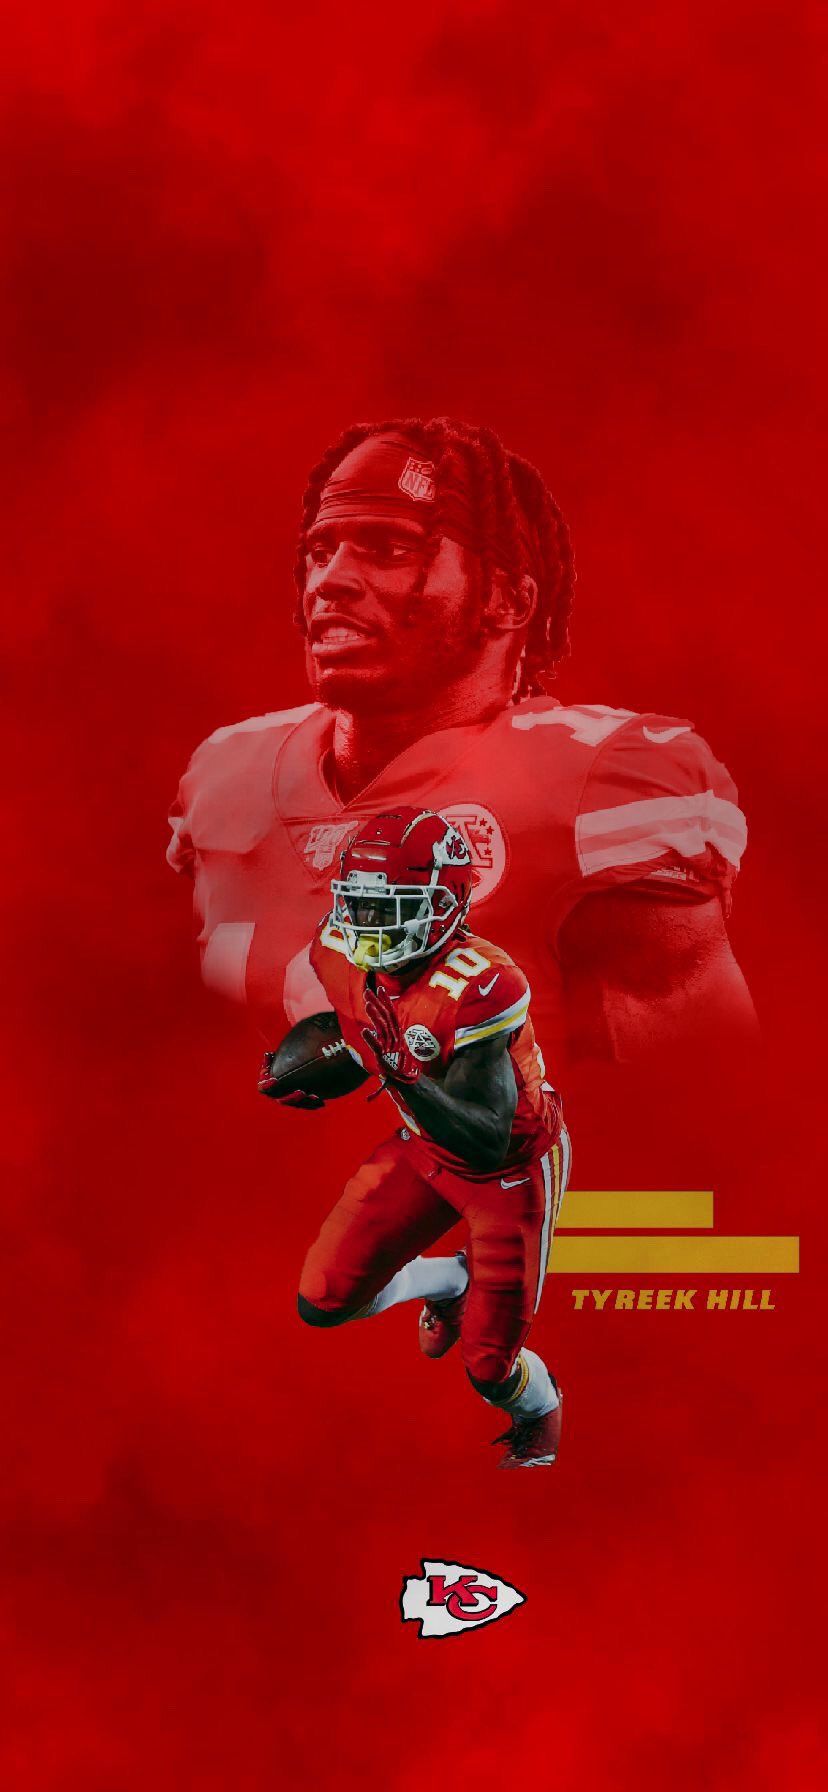 Tyreek Hill trade details Dolphins provide massive NFL Draft pick package  contract extension for Chiefs wide receiver  Sporting News